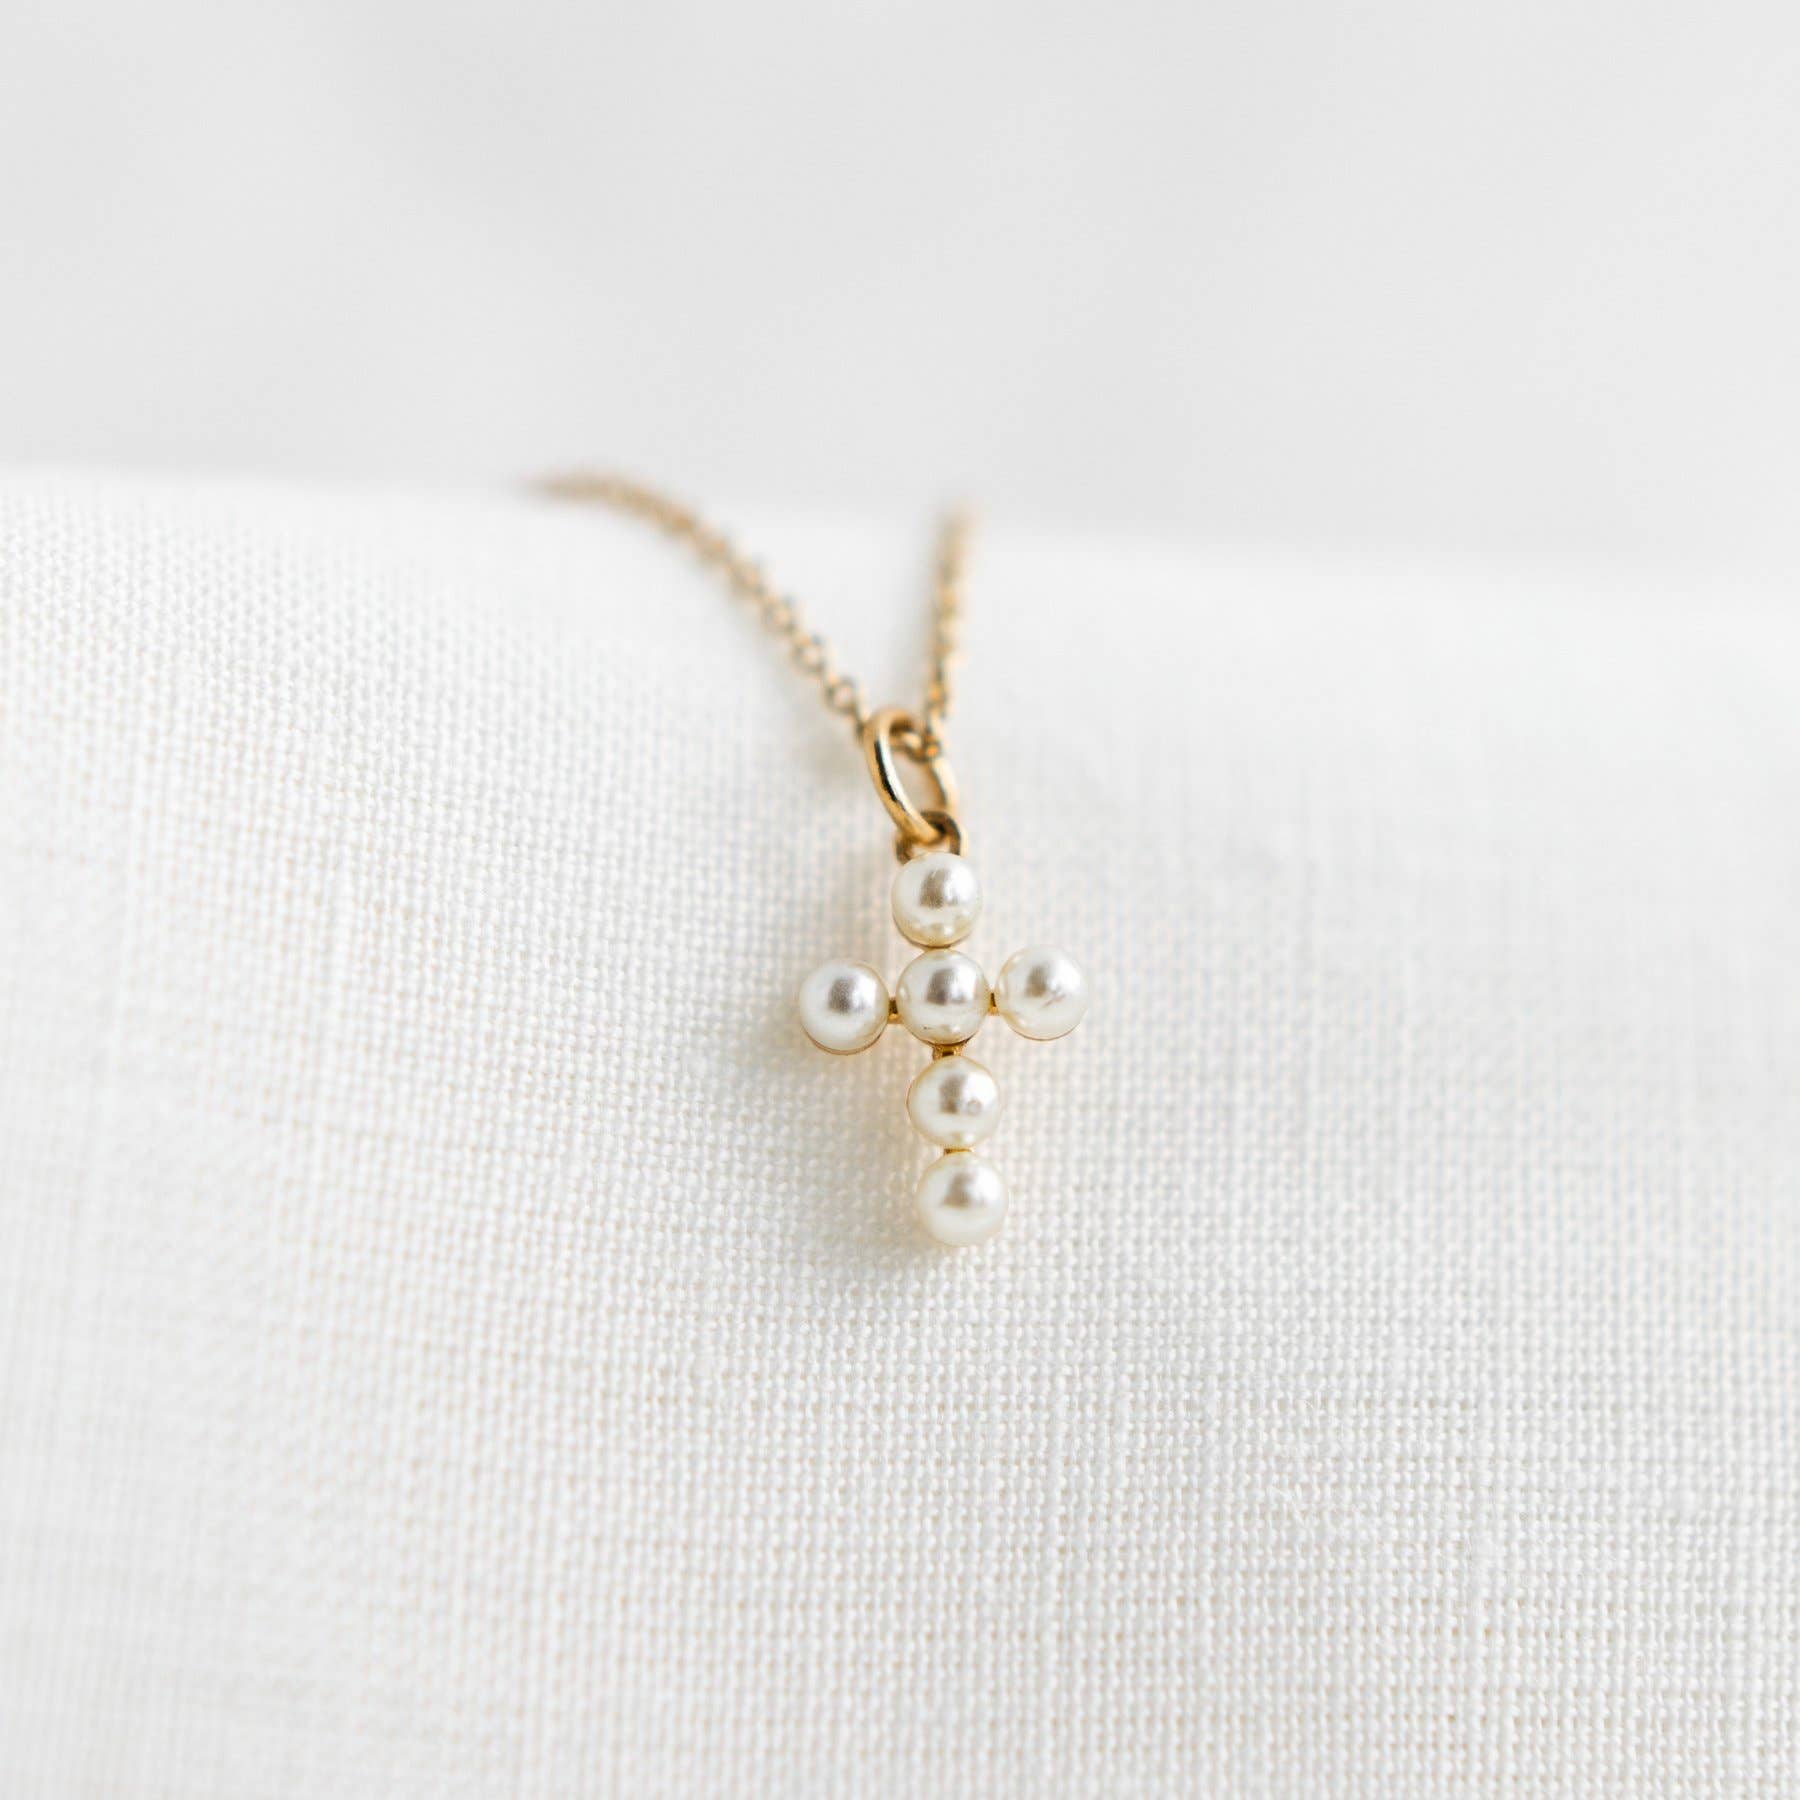 Pia Necklace | Jewelry Gold Gift Waterproof